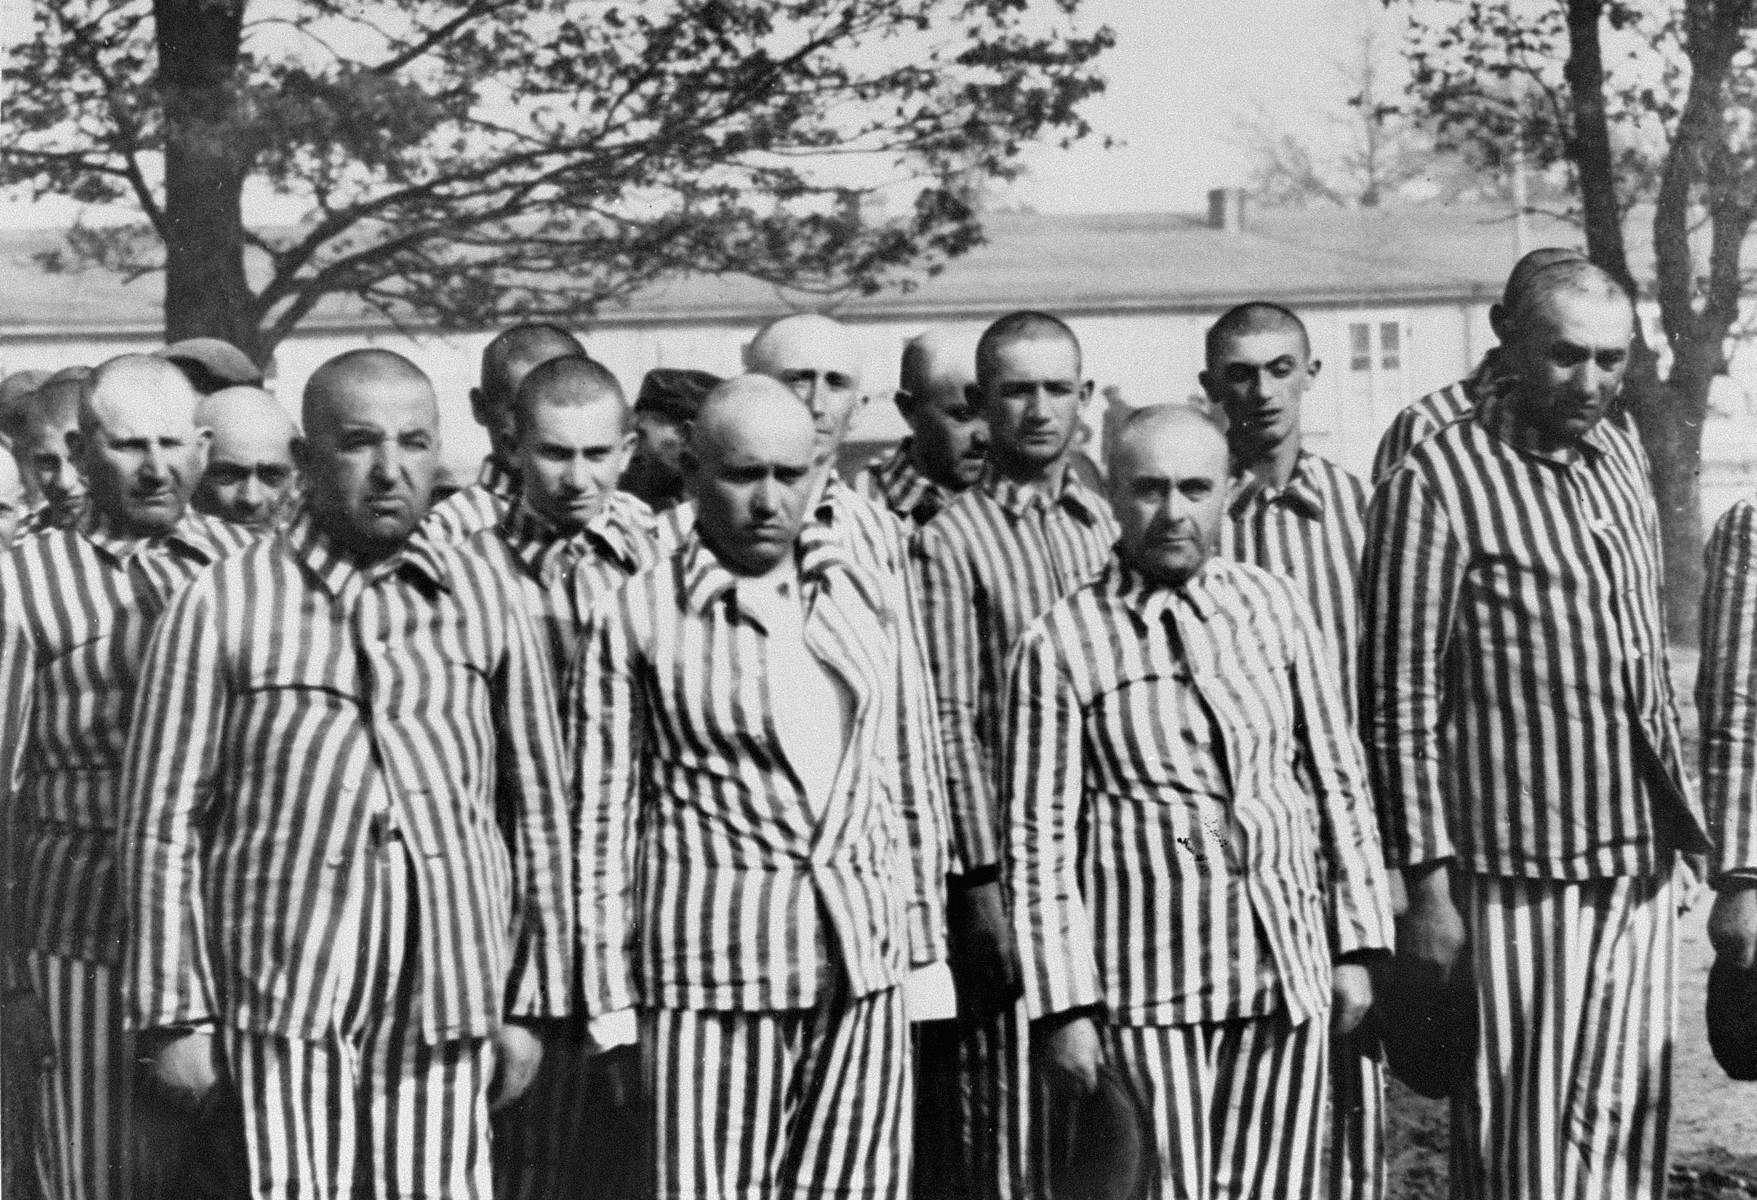 Jewish men from Subcarpathian Rus who have been selected for forced labor at Auschwitz-Birkenau, stand in their newly-issued prison uniforms at a roll call. 

Among those pictured are the butcher Salomon Lazar (second row, far left), the pharmacist Istvan Balaszo from Tecso (front row, third from the left), Shimshon Falkovics (back, center), Moshe Vogel (second from the right) and Shmuel Yitzhak Smilovics of Tacavo (far right).